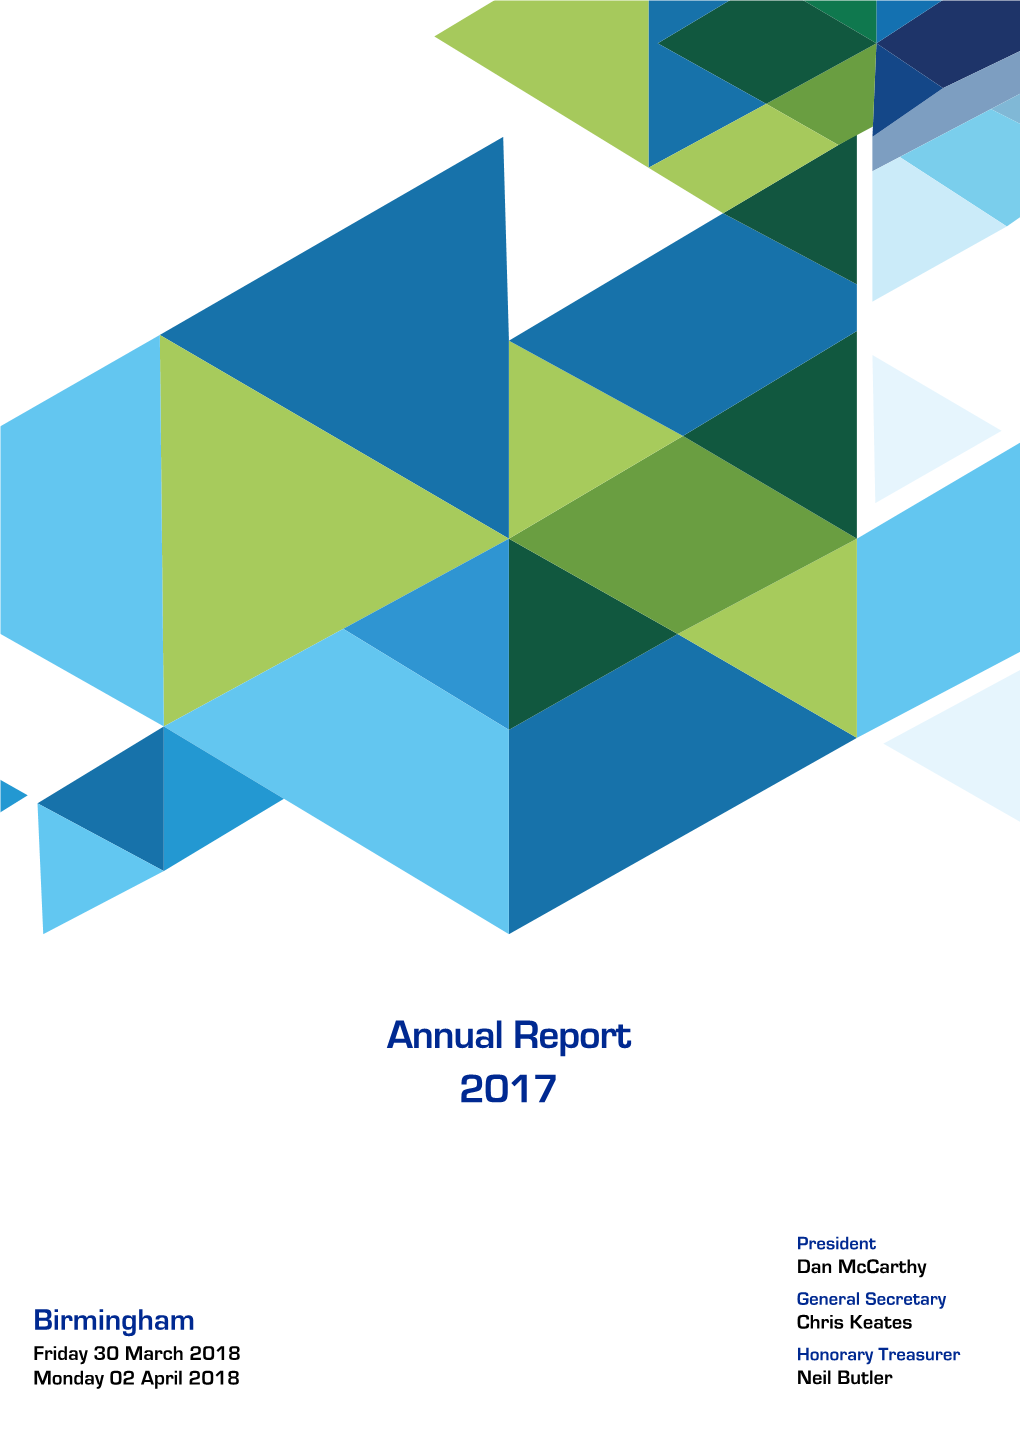 Annual Conference Report 2017